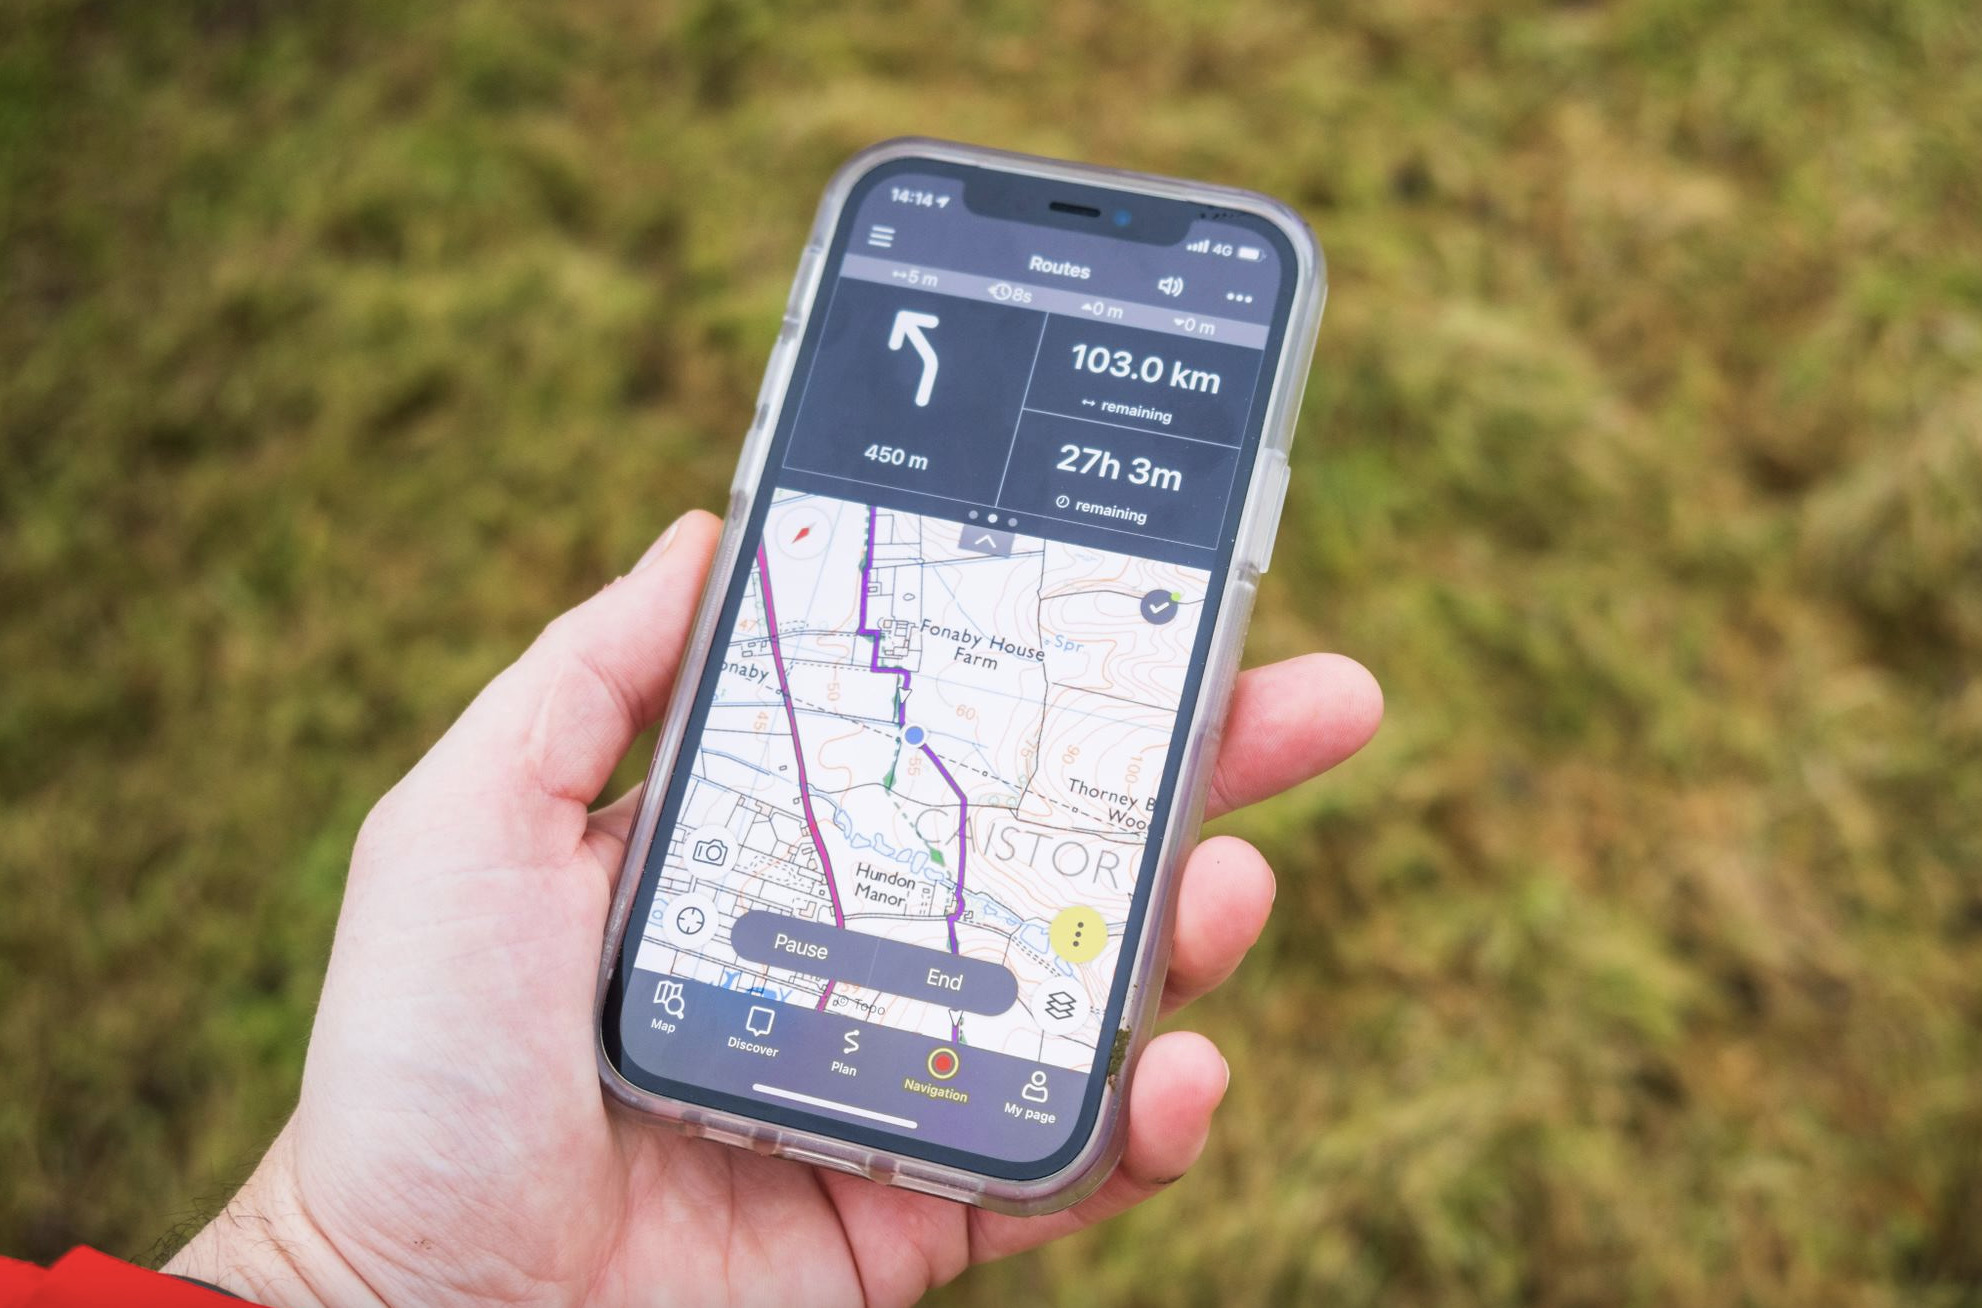 How to Choose & Use a GPS for Hiking